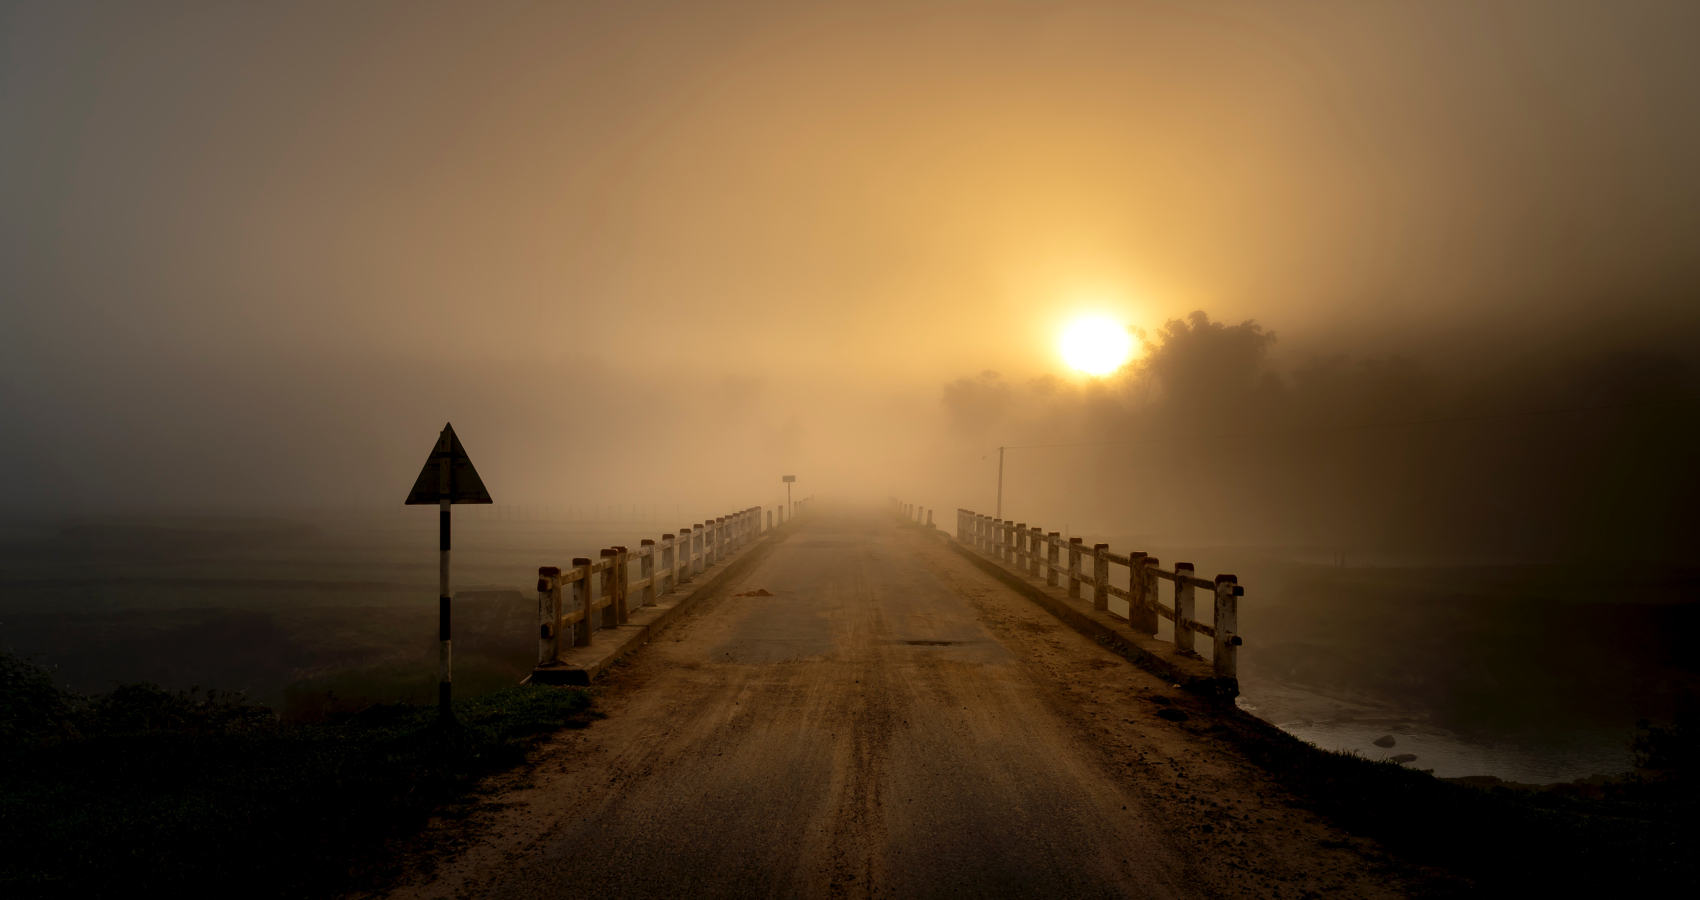 Fog at The Break of Dawn, poetry by Peggy Gerber at Spillwords.com